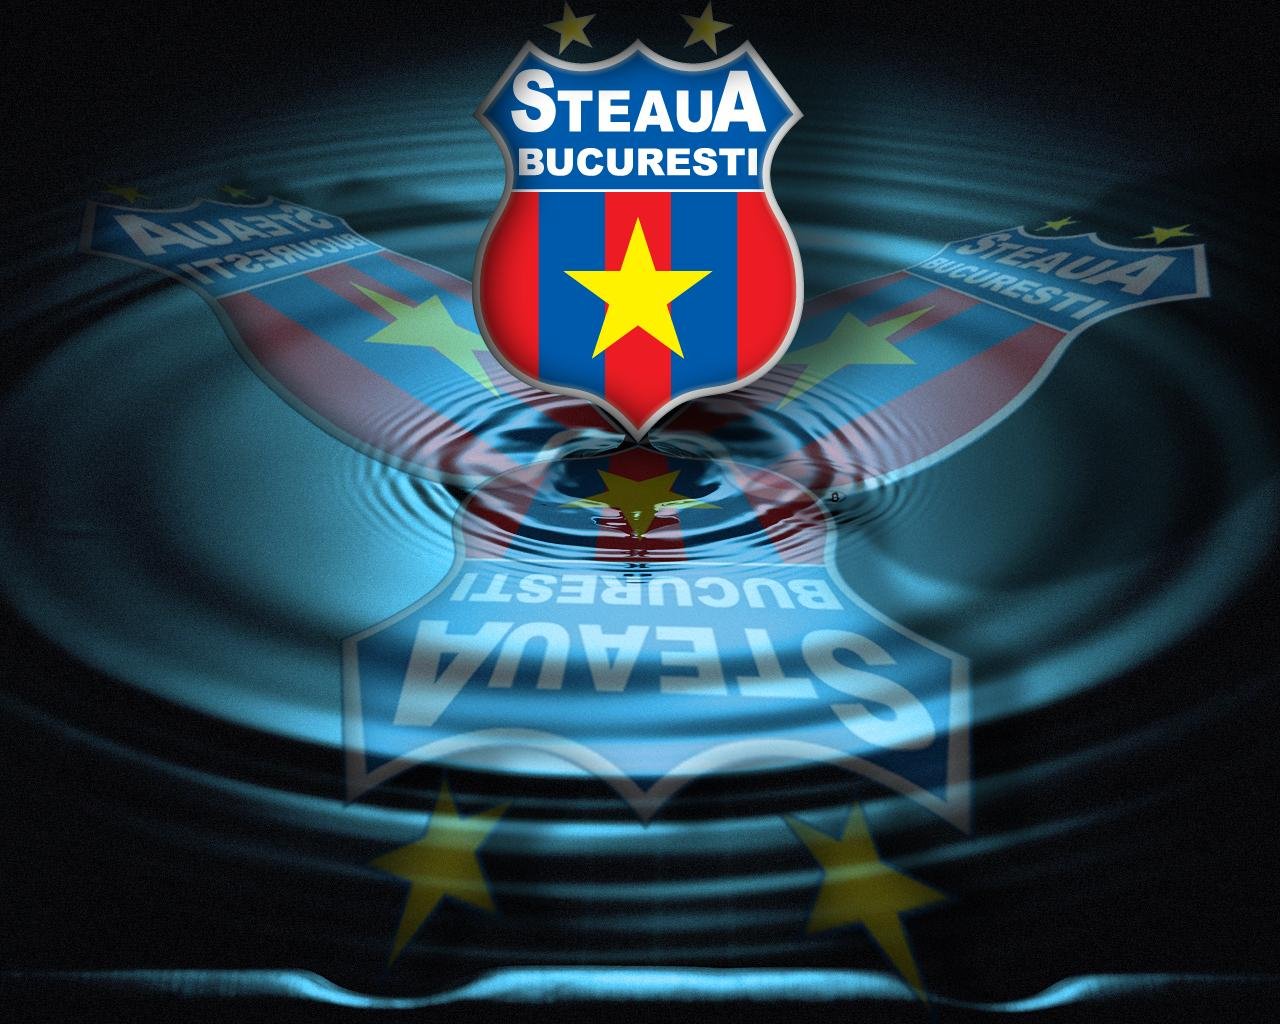 Historic Treble For FC Steaua Bucharest! Where To Now?